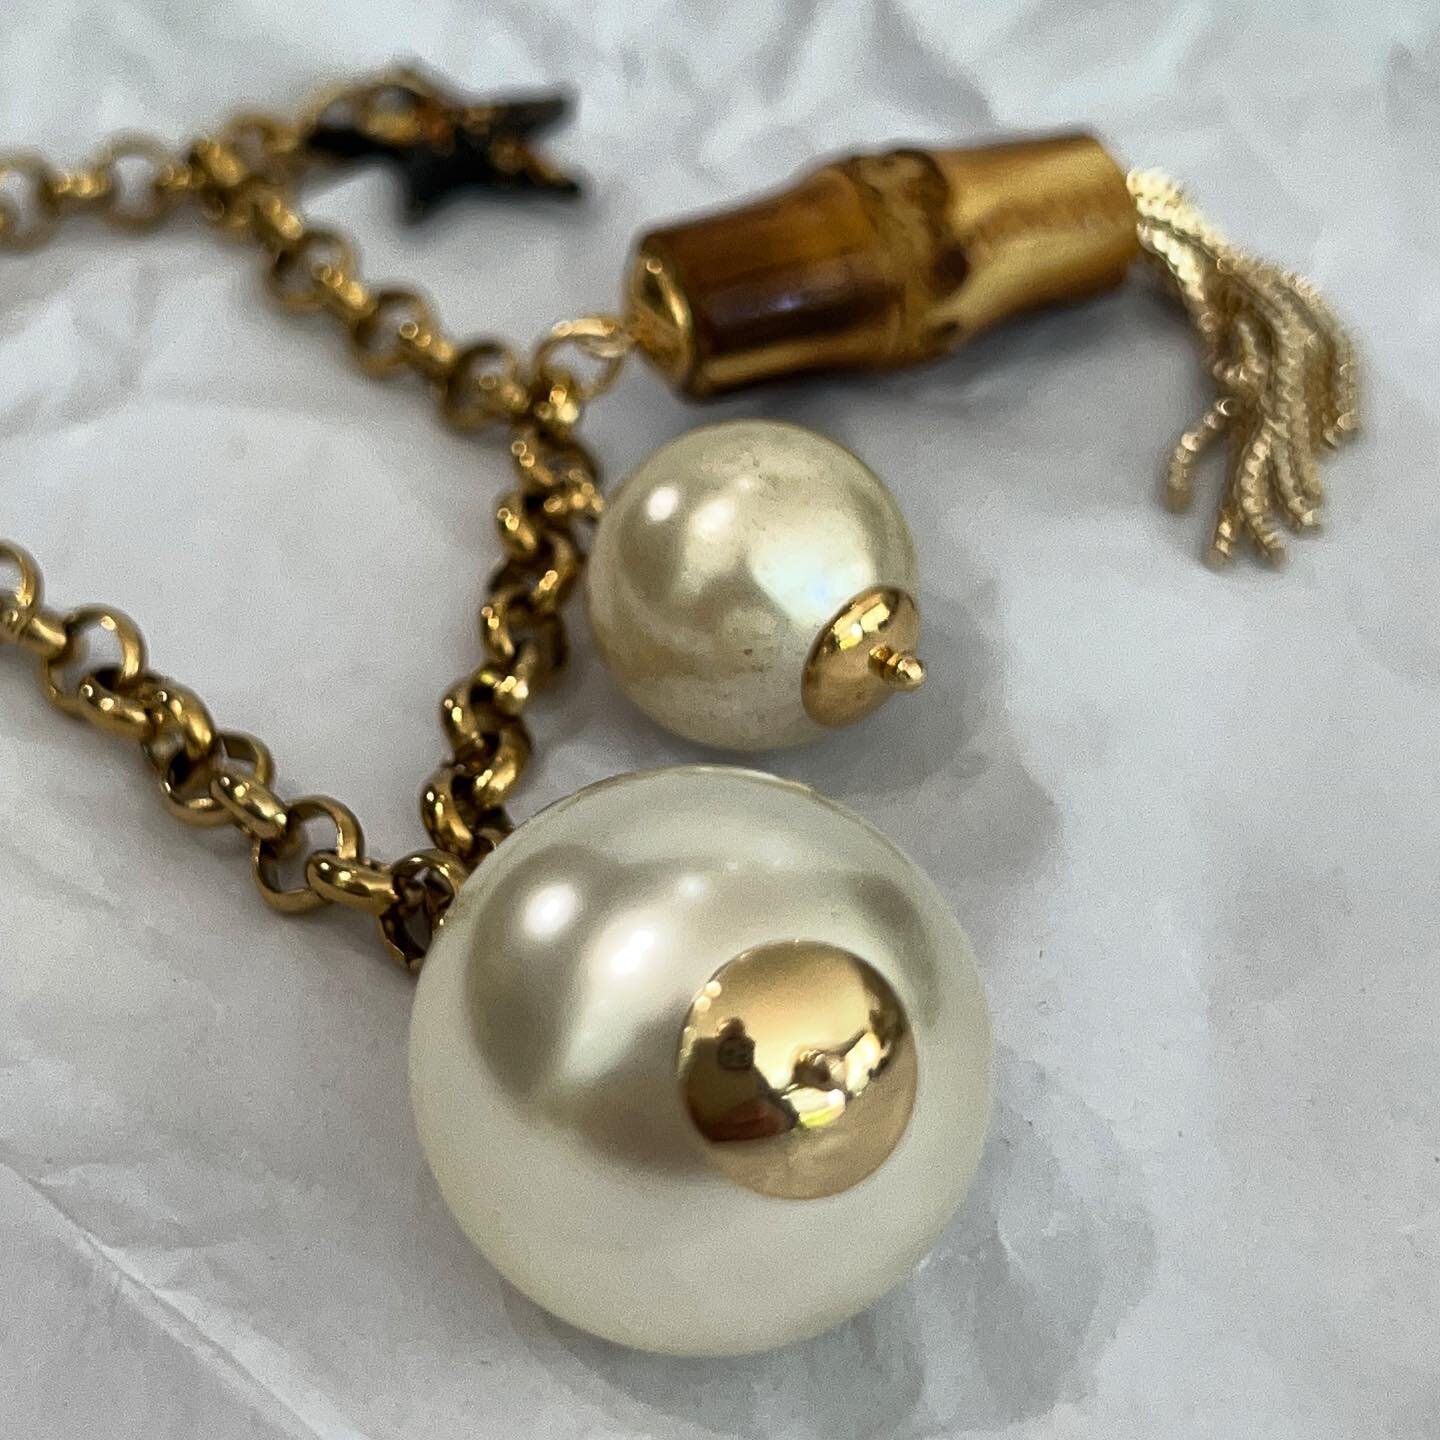 The bigger the pearl, the closer to Rosie 🤗 #40mm #big #bracelet #bambootassel #stainlesssteel #goldplated #artworkerprojects